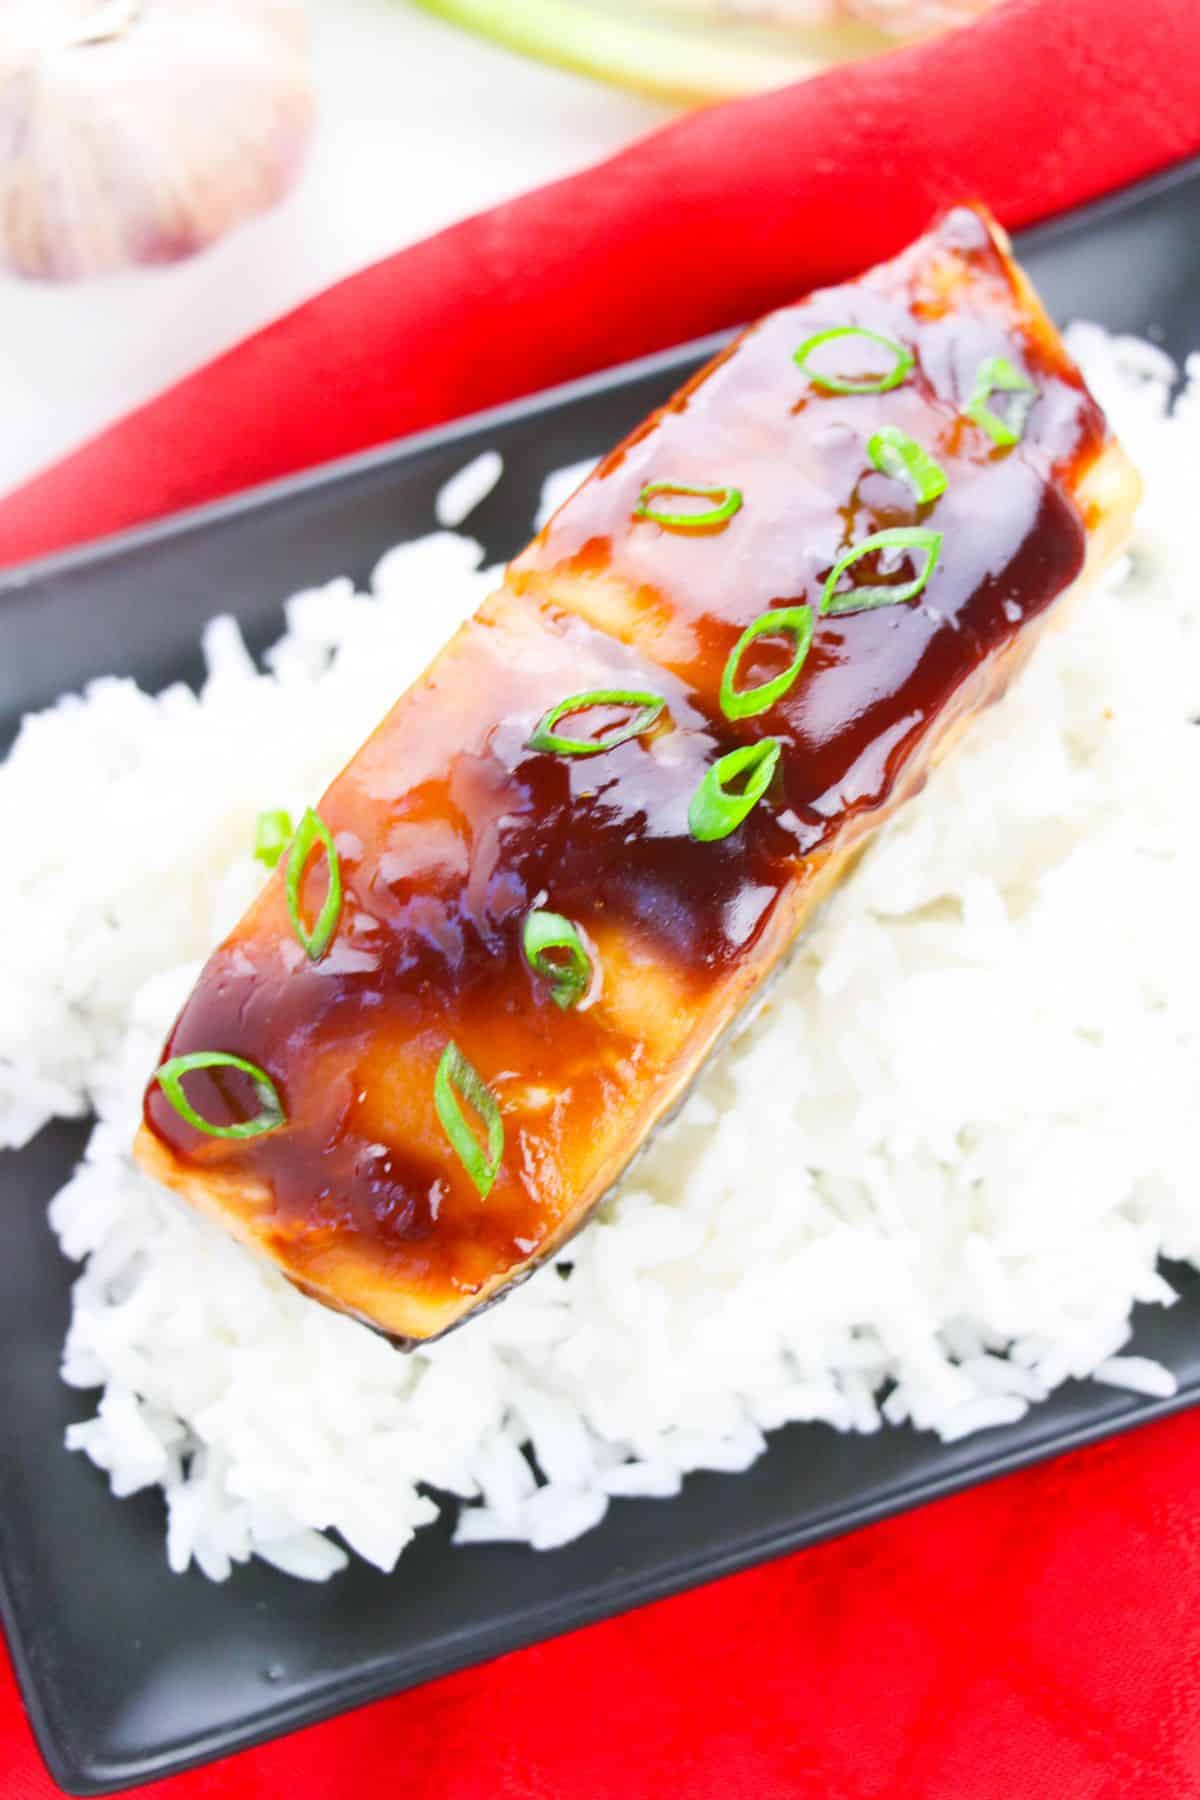 Baked Teriyaki Glazed Salmon on a serving plate garnished with sliced green onions.